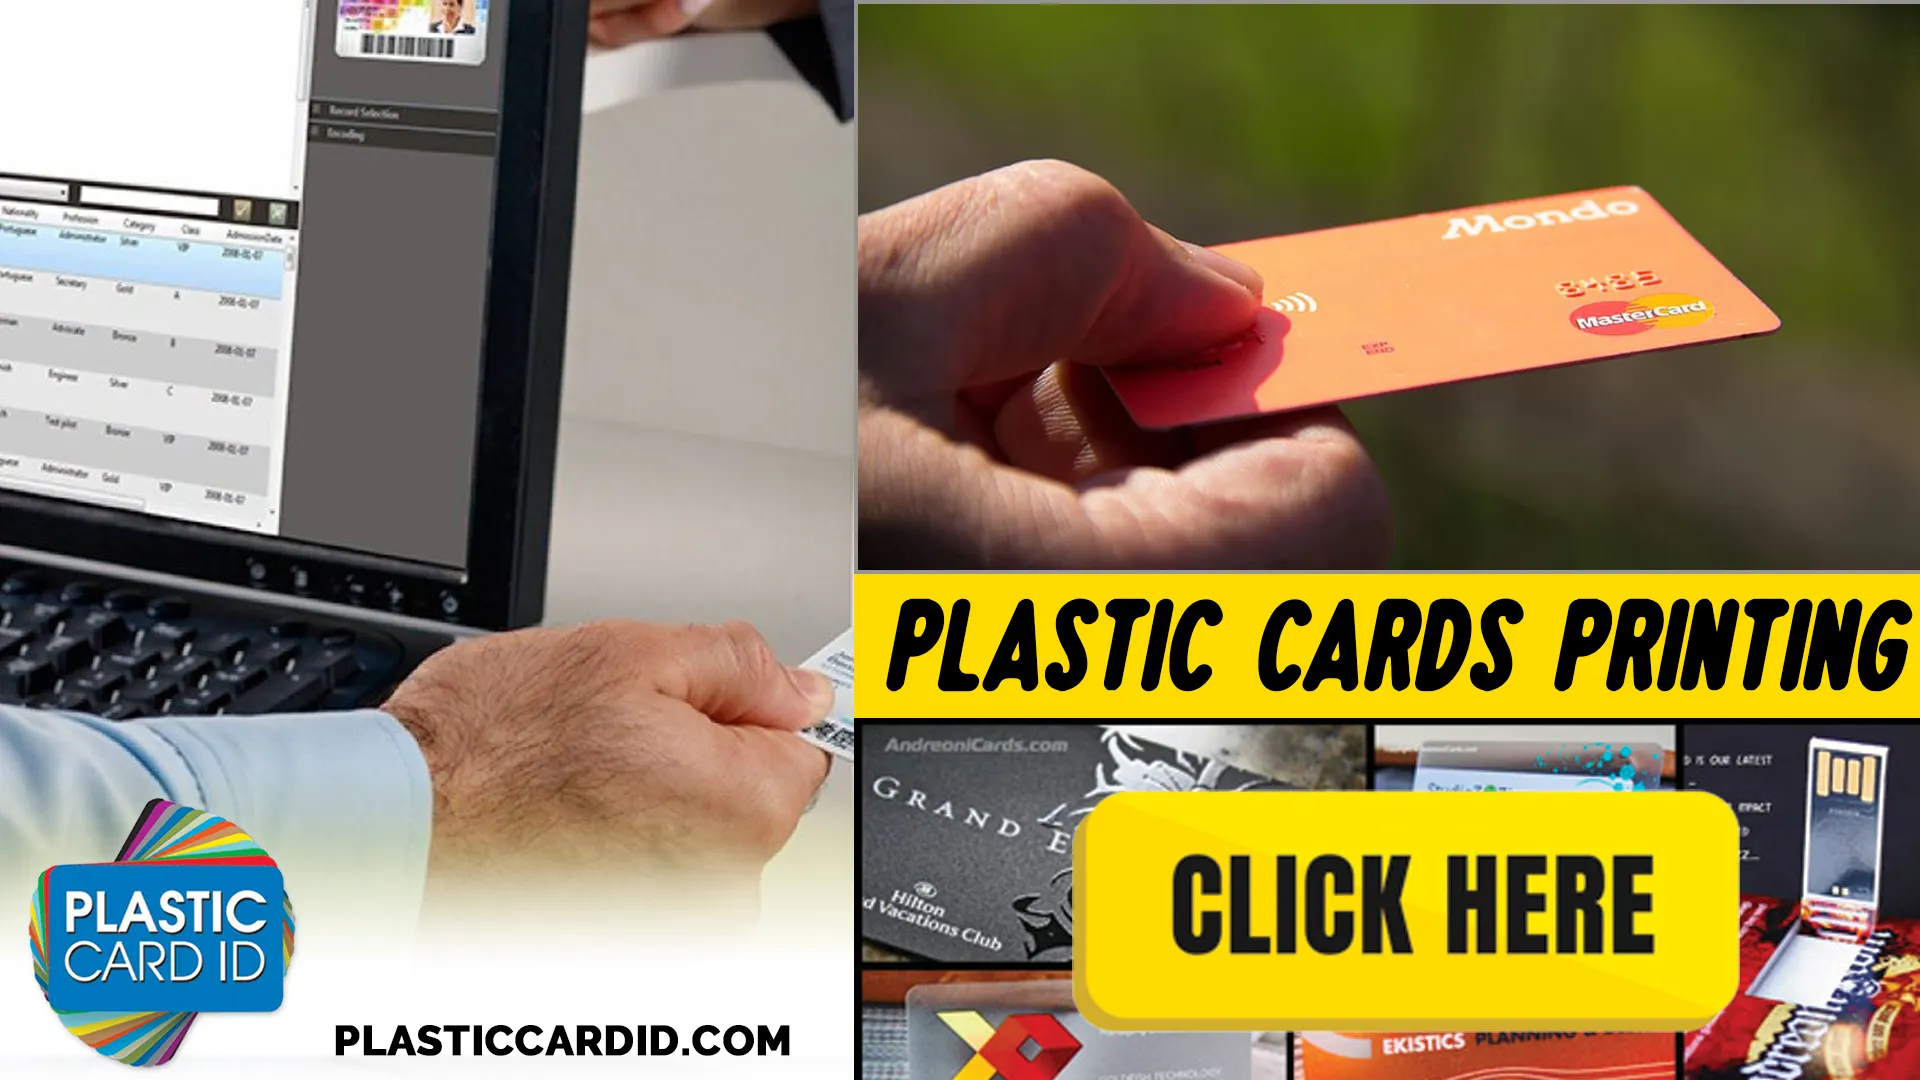 Stay Ahead of Consumer Trends with Plastic Card ID




